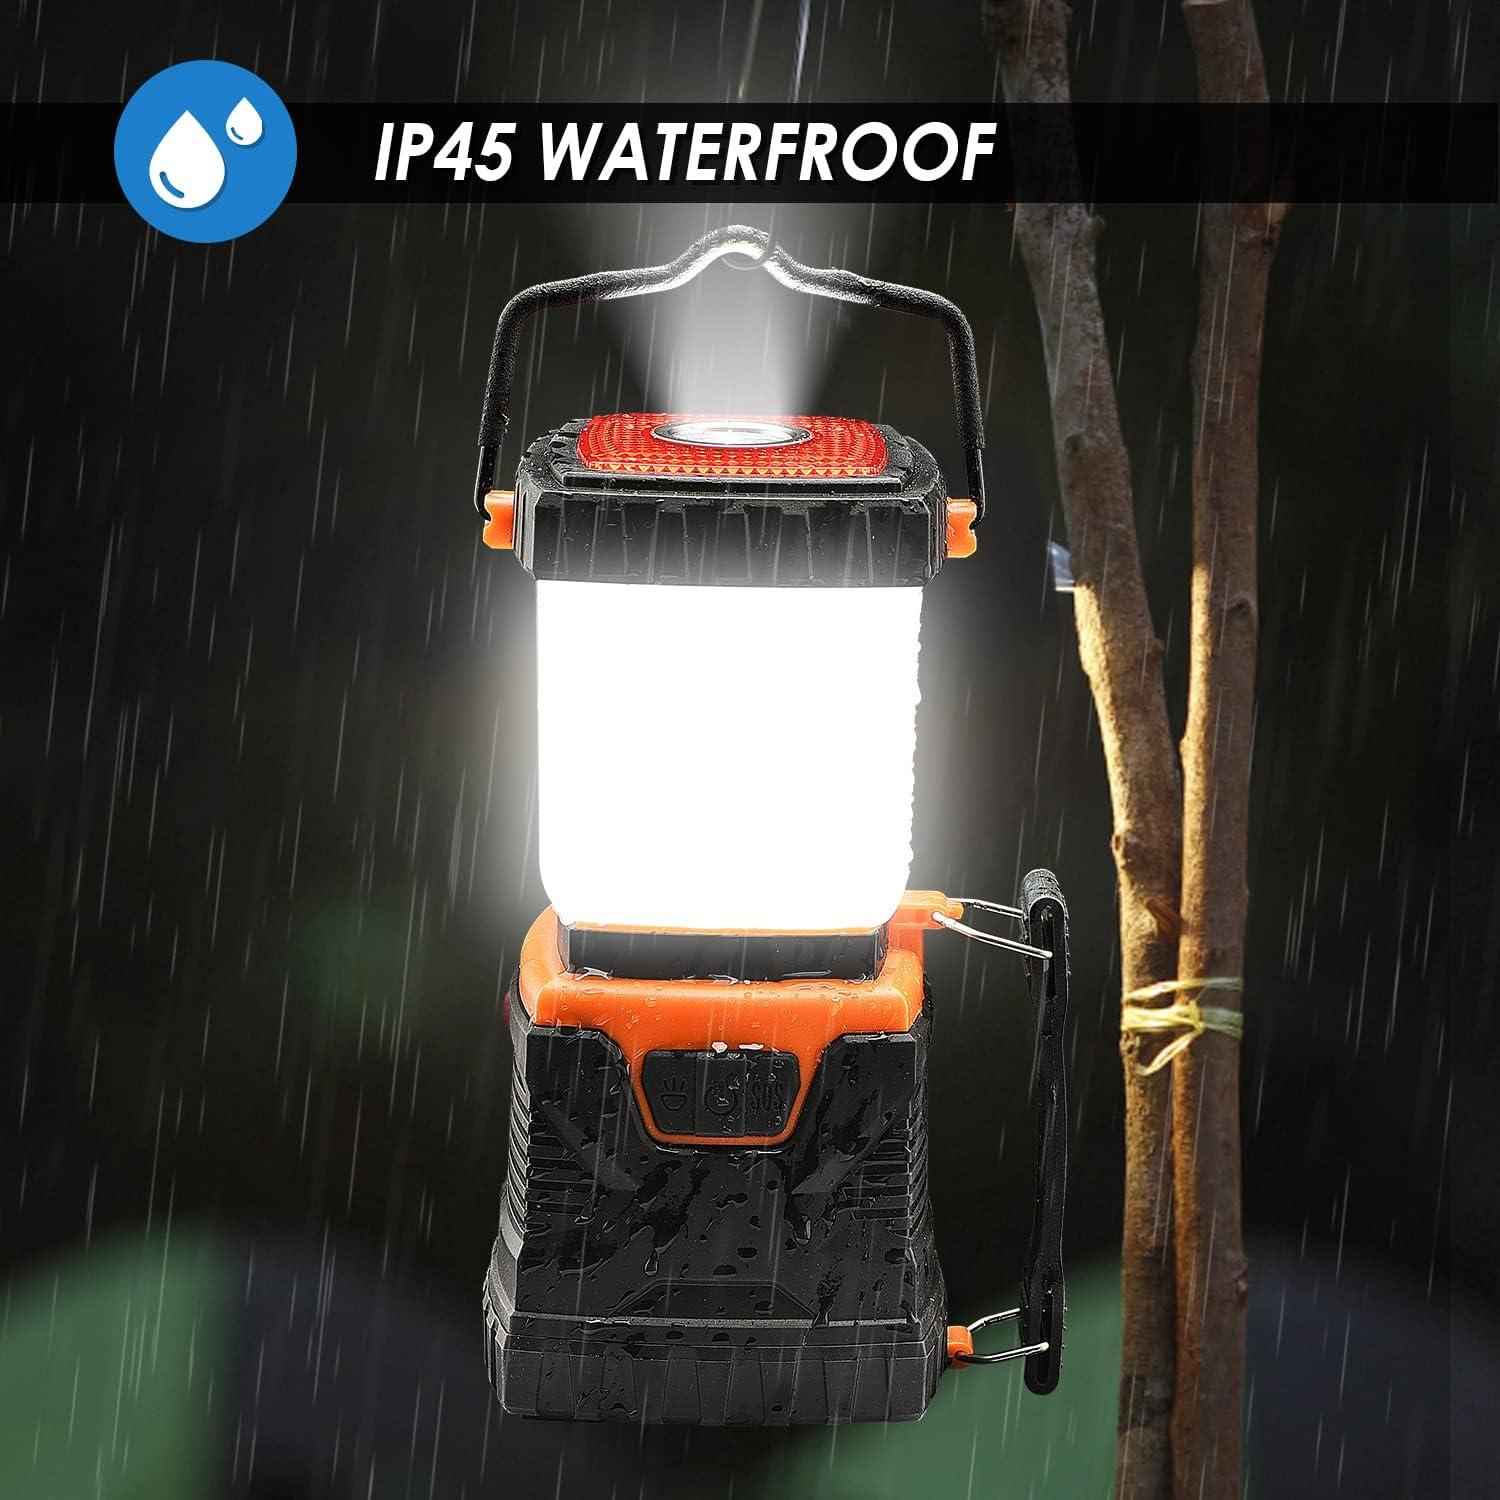 LED Camping Lantern, Wsky High Lumens Lanterns for Power Outages